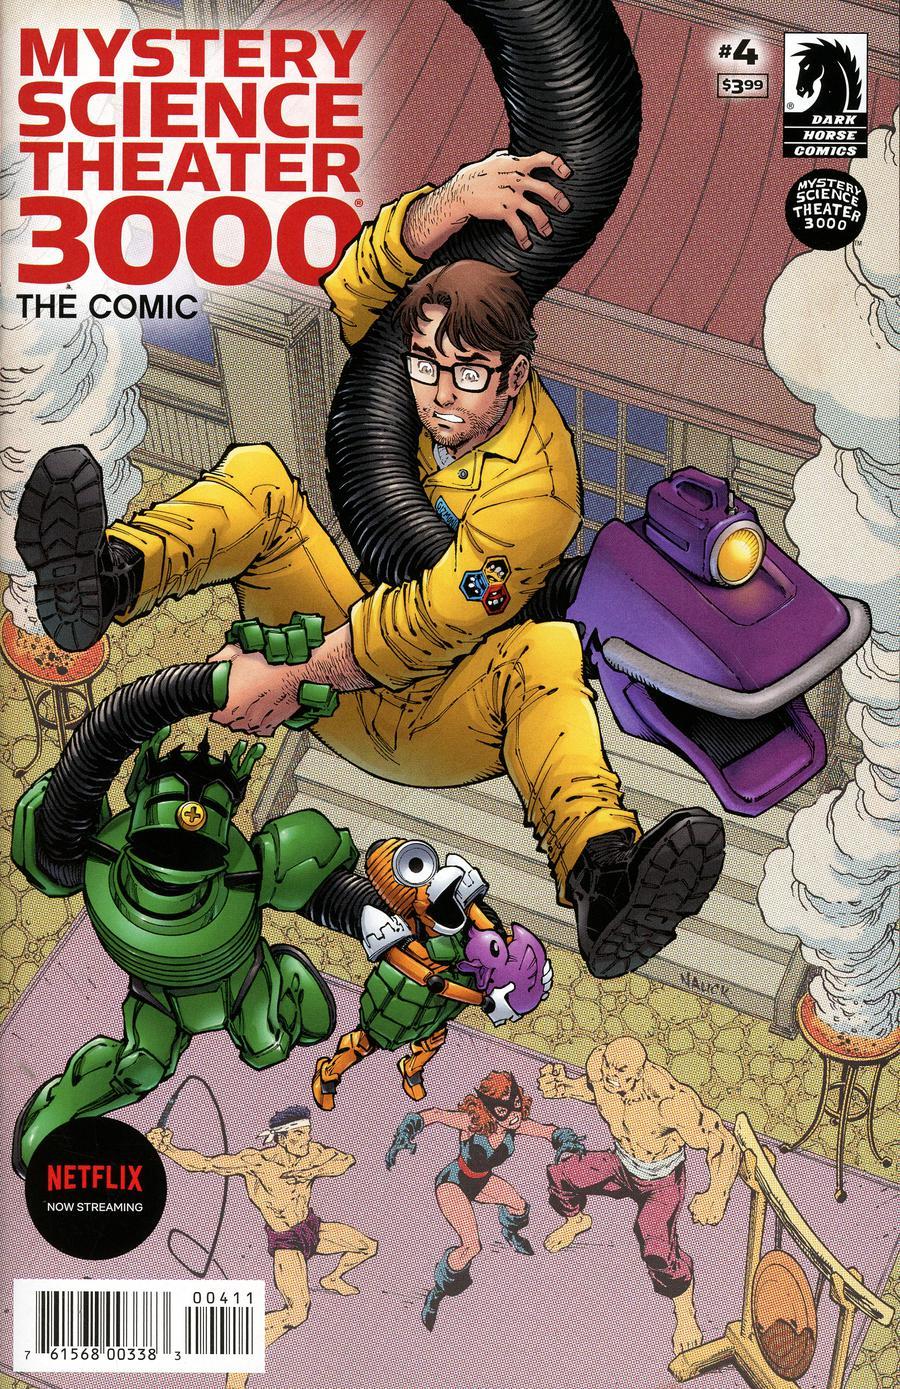 Mystery Science Theater 3000 Vol. 1 #4